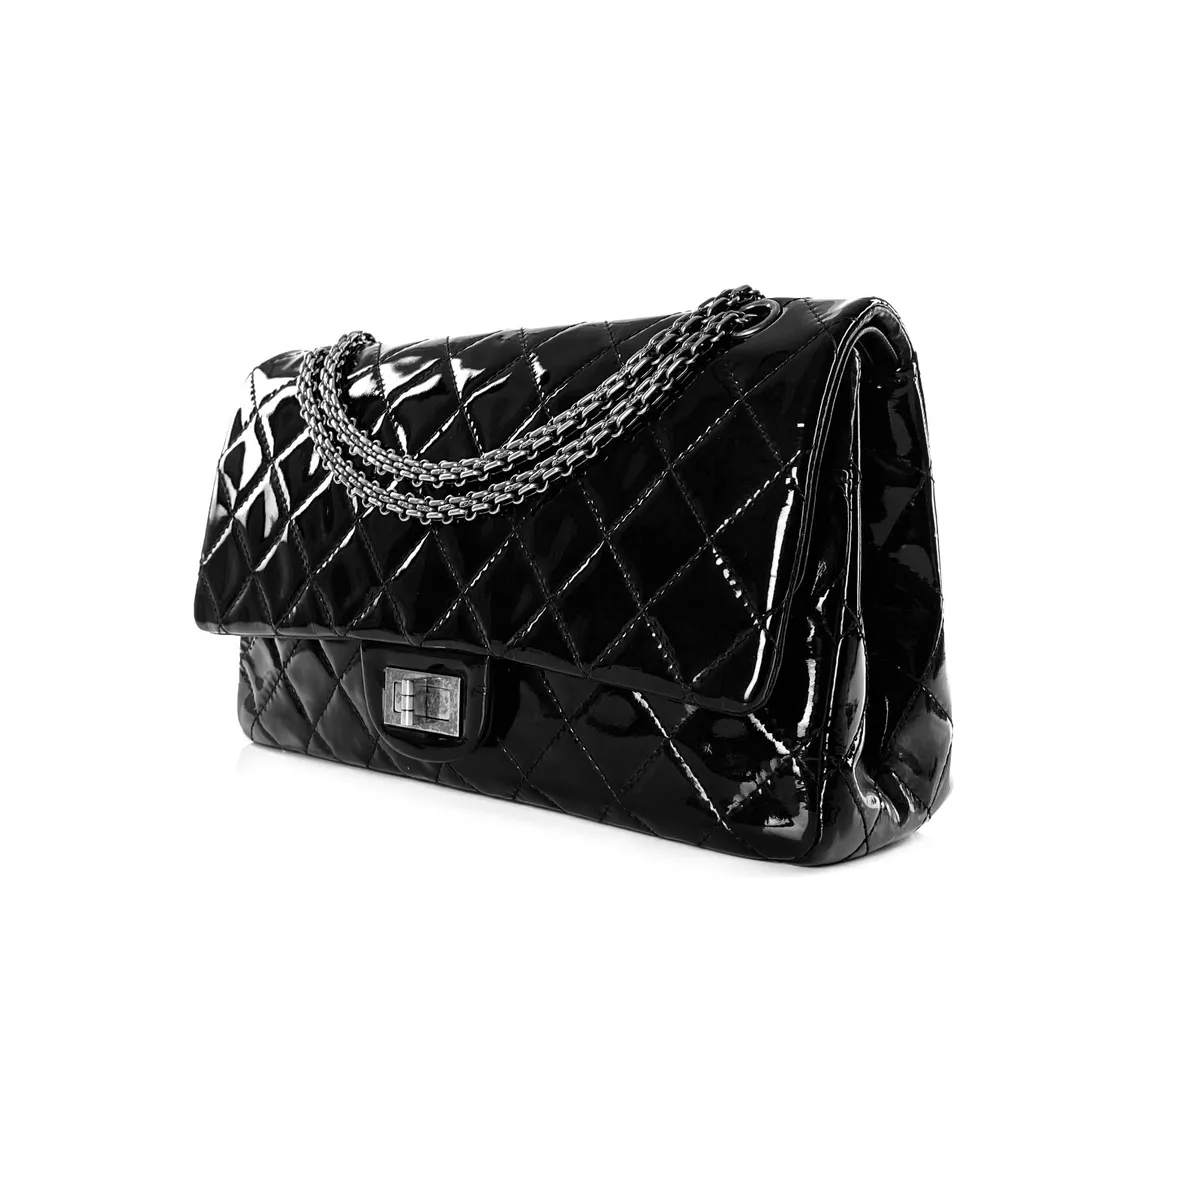 Chanel Maxi 227 Jumbo Black Patent Leather Reissue 2.55 Double Flap RHW Bag